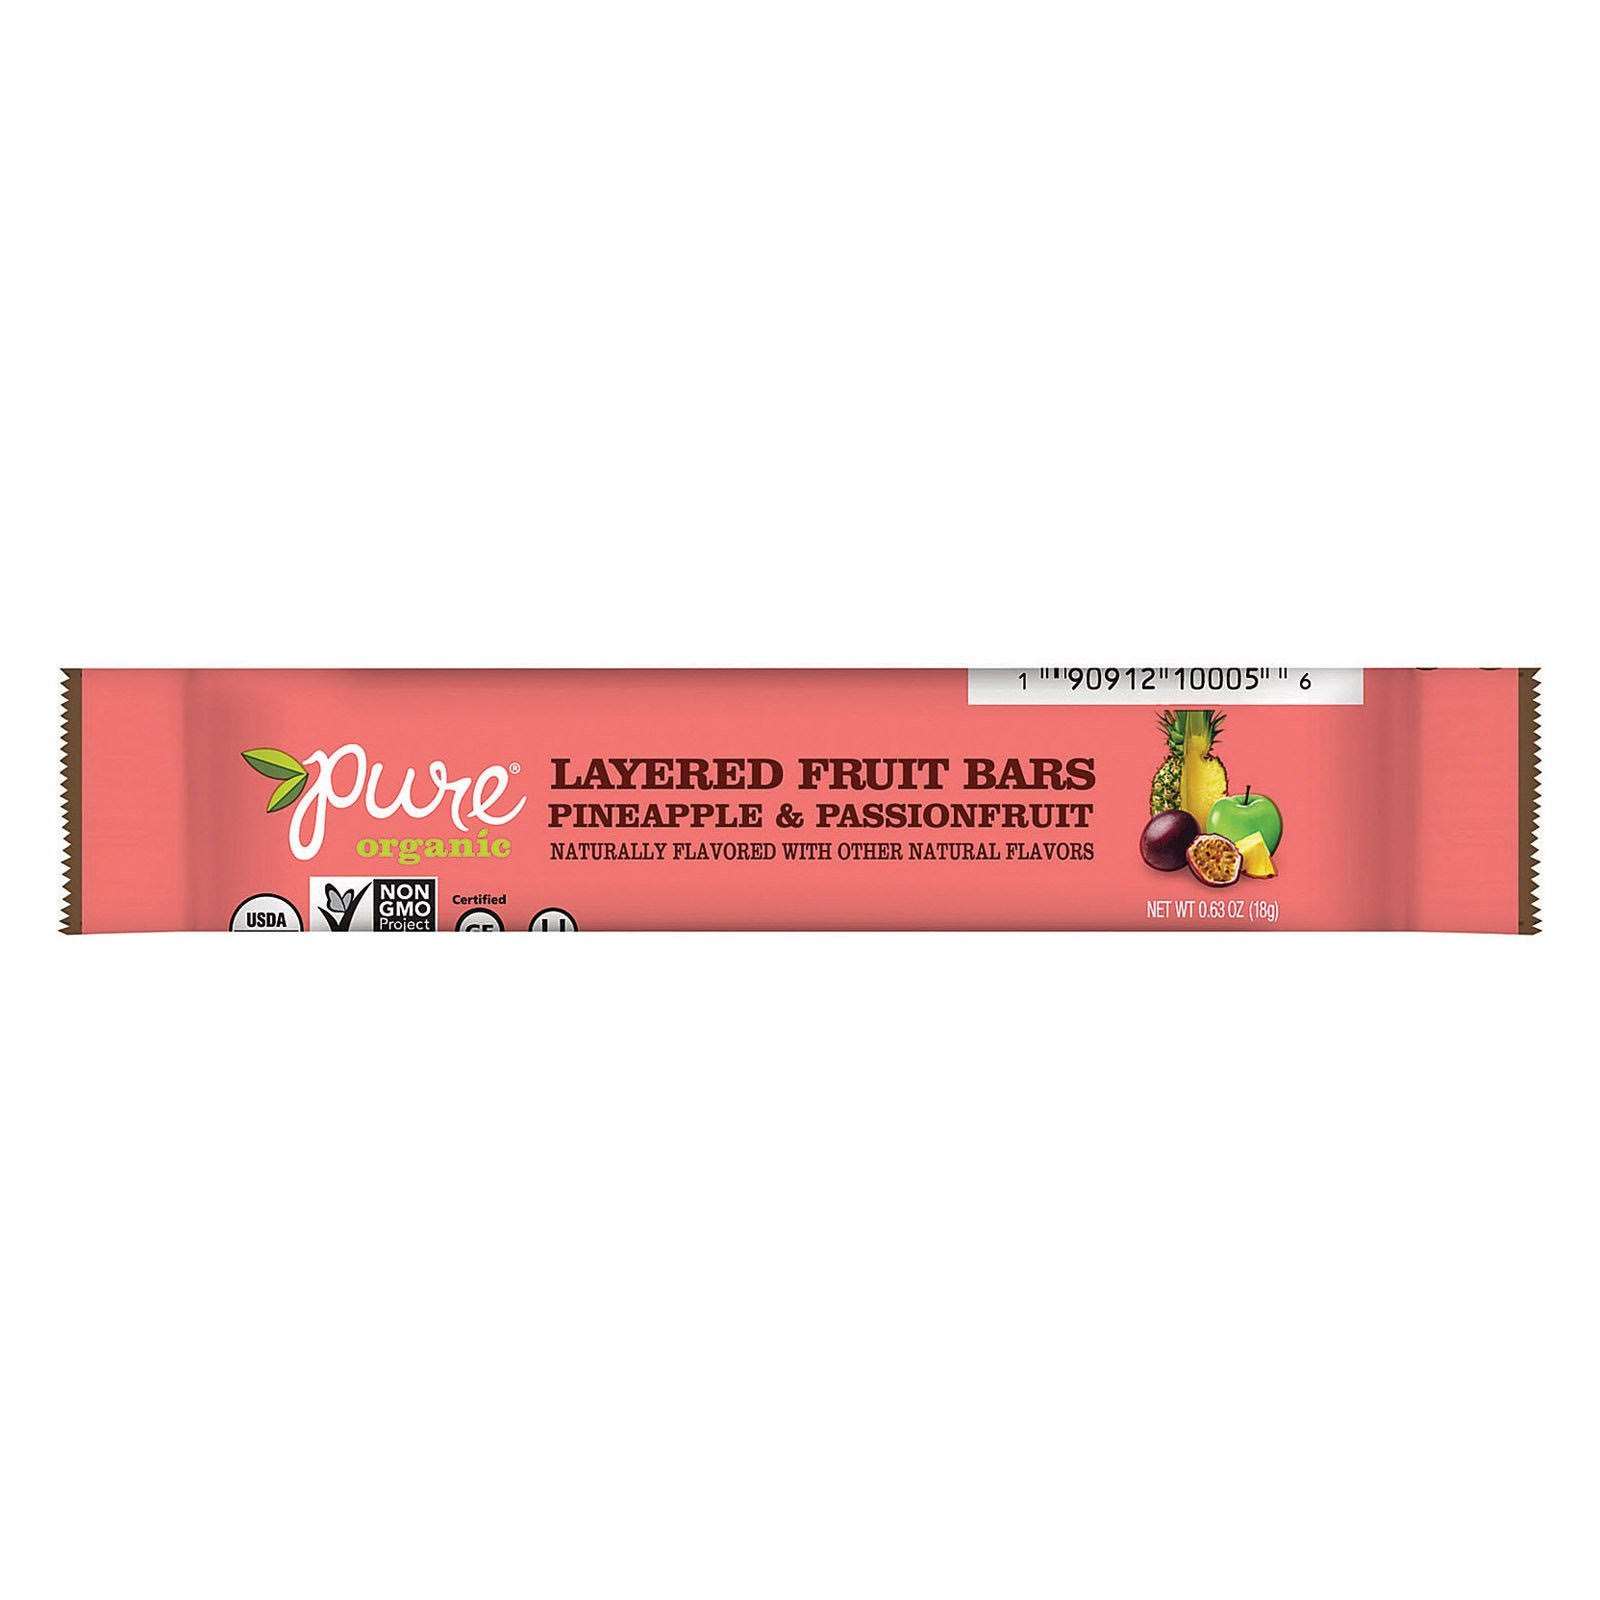 Pure Layered Fruit Bars - Pineapple and Passion Fruit, .63oz